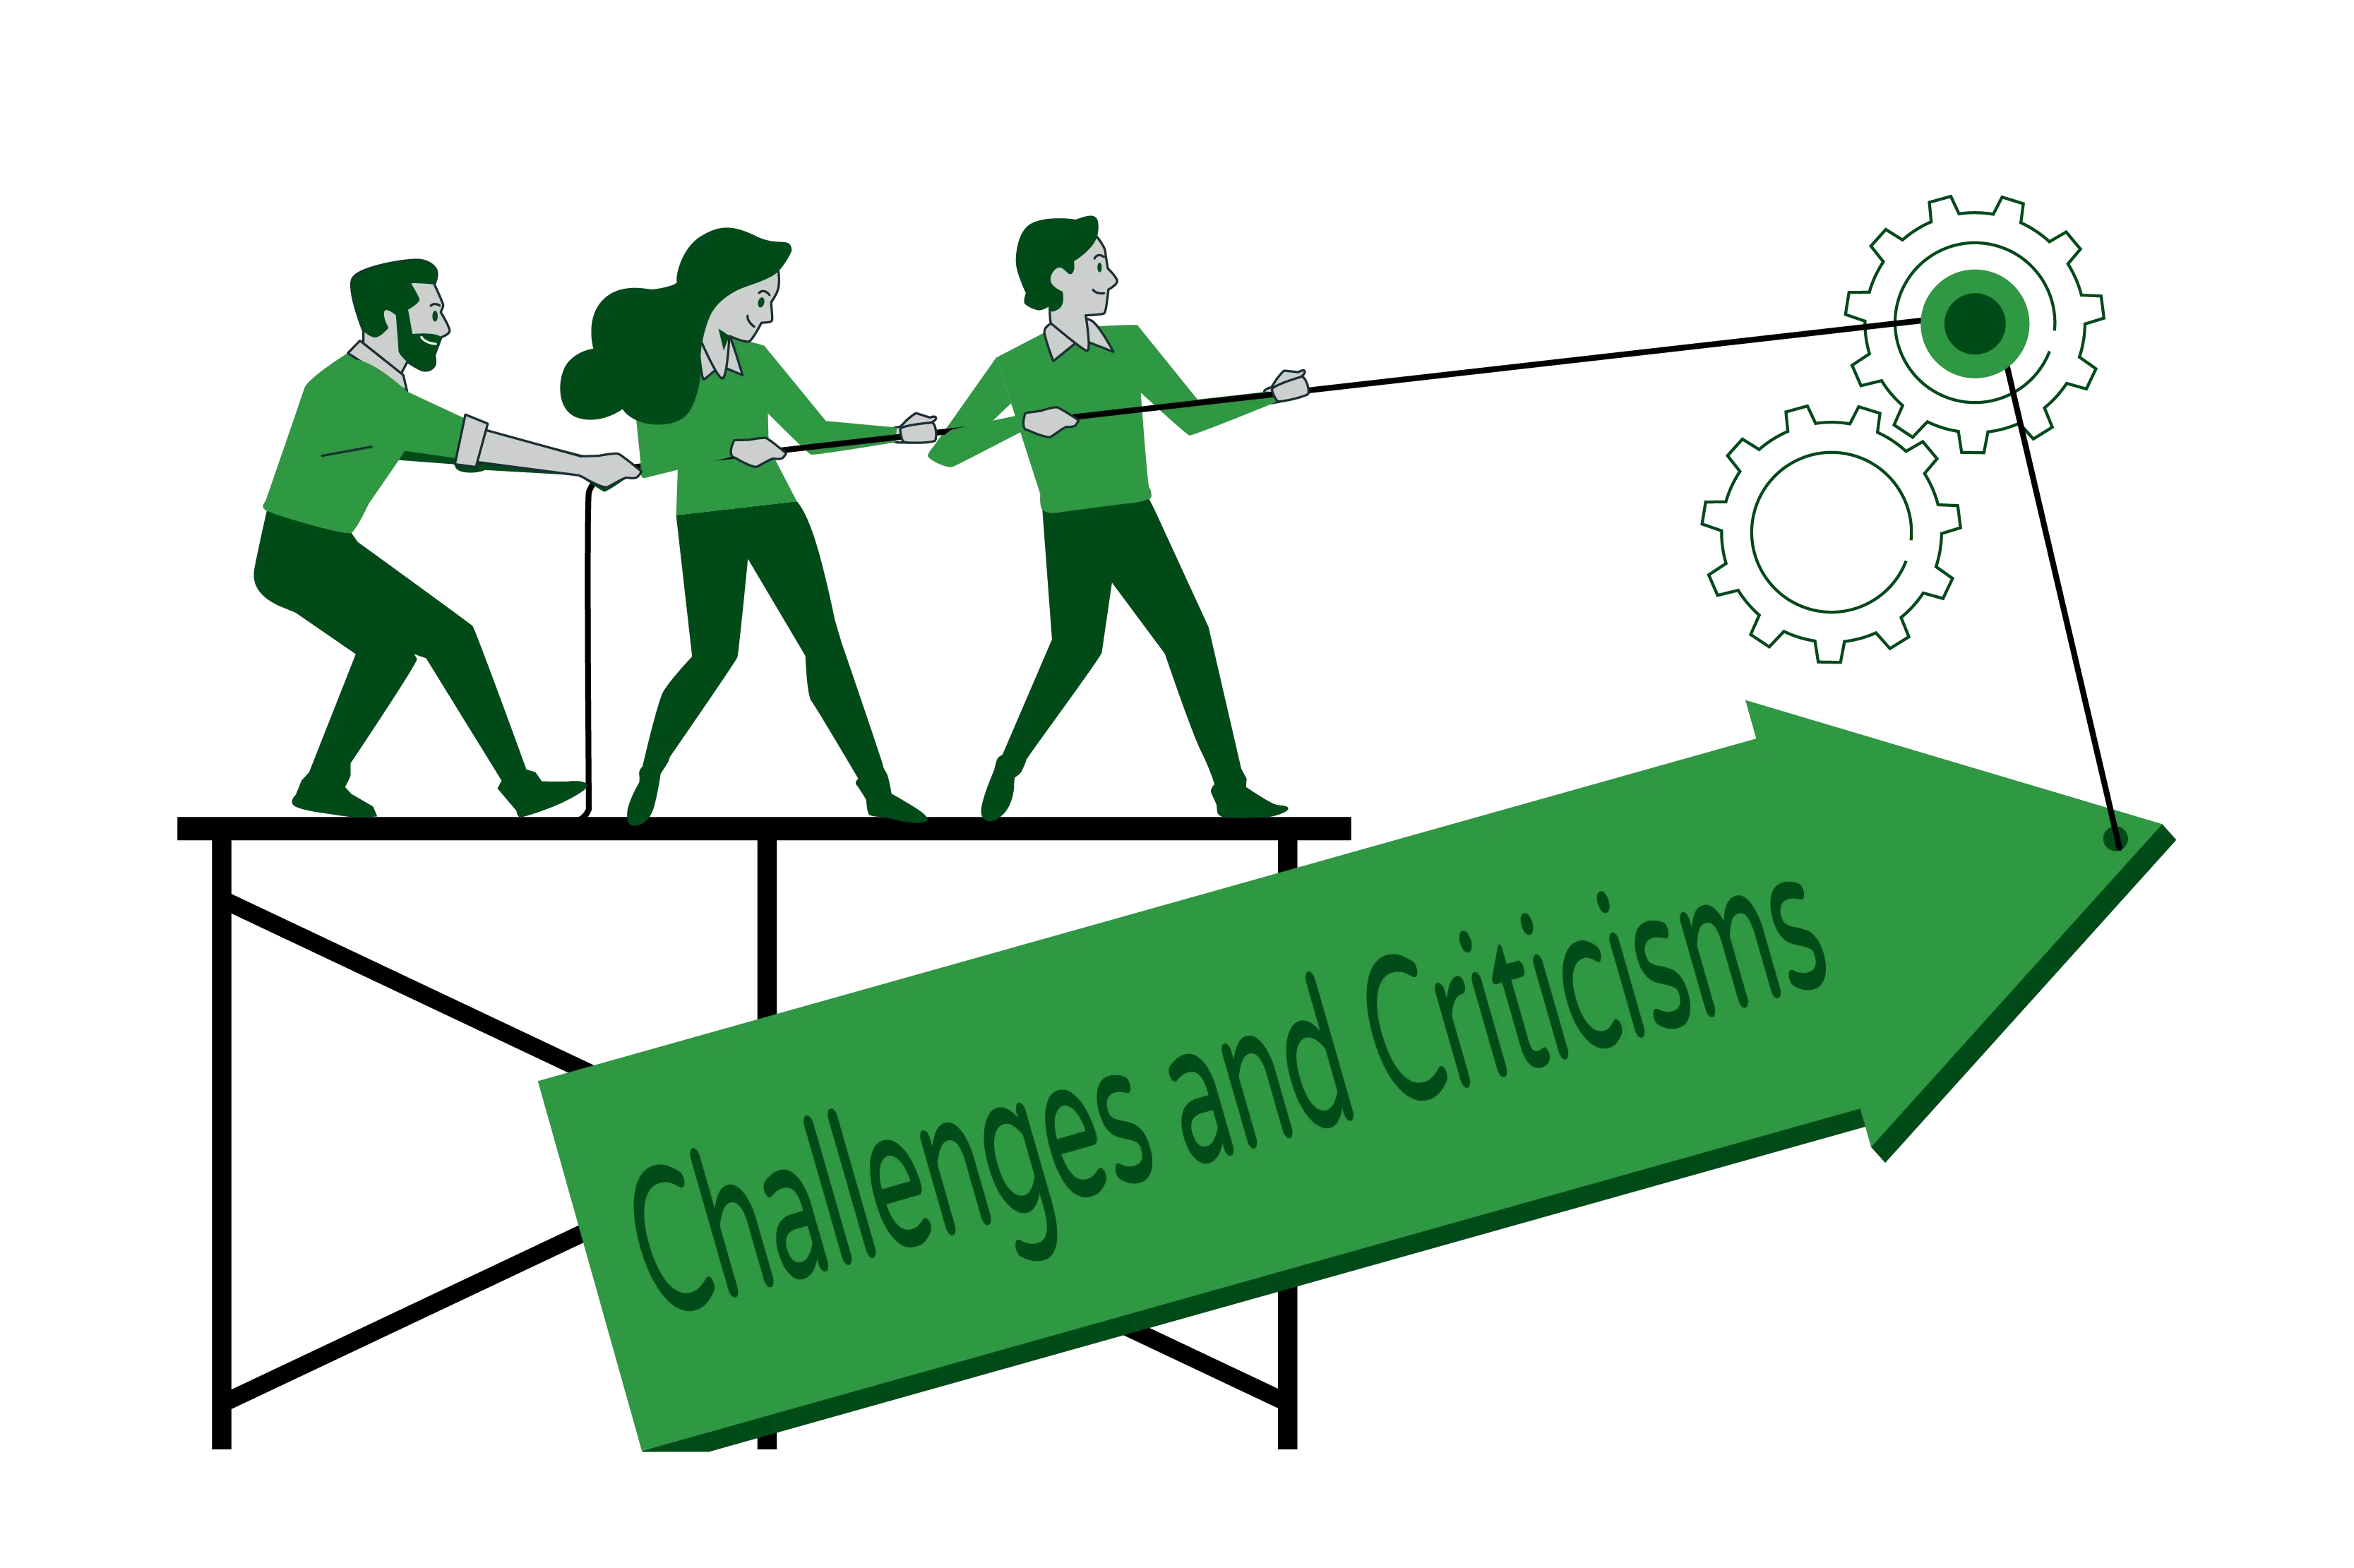 Illustration titled 'Challenges and Criticism' portrays three people engaged in a tug-of-war with a pulley system, symbolizing the challenges and criticisms related to greenhouse gas (GHG) accounting methods."  The central theme of the illustration revolves around the challenges and criticism associated with GHG accounting methods, as indicated by the title. The three individuals pulling the rope in opposite directions represent the conflicting perspectives and debates surrounding these issues.  The pulley system and the big arrow connected to it represent the force of criticism and challenges faced in GHG accounting. The arrow signifies the weight of scrutiny and questioning, highlighting the need for accuracy and transparency in reporting environmental impact.  The text emphasizes two specific challenges:  Greenwashing: The illustration visually represents the concept of greenwashing, where companies inaccurately present their environmental impact positively. This is depicted by the individuals pulling the rope, suggesting the tension and deception caused by misleading claims.  Measuring Scope 3 Emissions: The illustration visually represents the complexity of tracking and managing Scope 3 emissions, which are emissions occurring outside a company's direct control. The diverse sources and data challenges are symbolized by the individuals struggling to maintain balance while holding the rope.  The overall imagery of the illustration conveys the difficulties in achieving accurate emissions reporting, addressing greenwashing concerns, and ensuring transparency and accountability in environmental practices. It represents the need for standardized methodologies, proper data verification, and responsible business practices to overcome these challenges and drive progress in lowering greenhouse gas emissions.